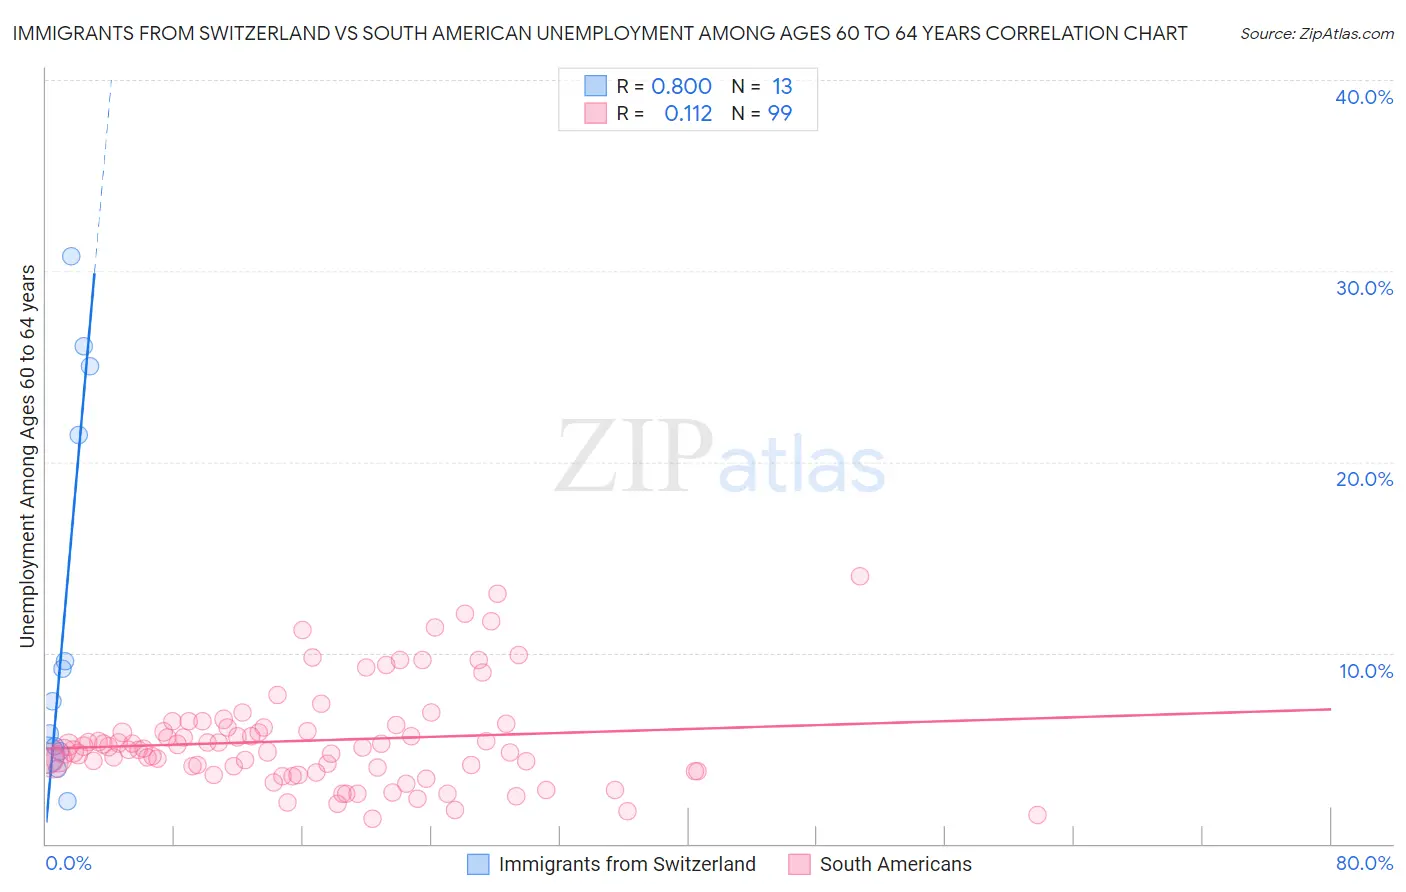 Immigrants from Switzerland vs South American Unemployment Among Ages 60 to 64 years